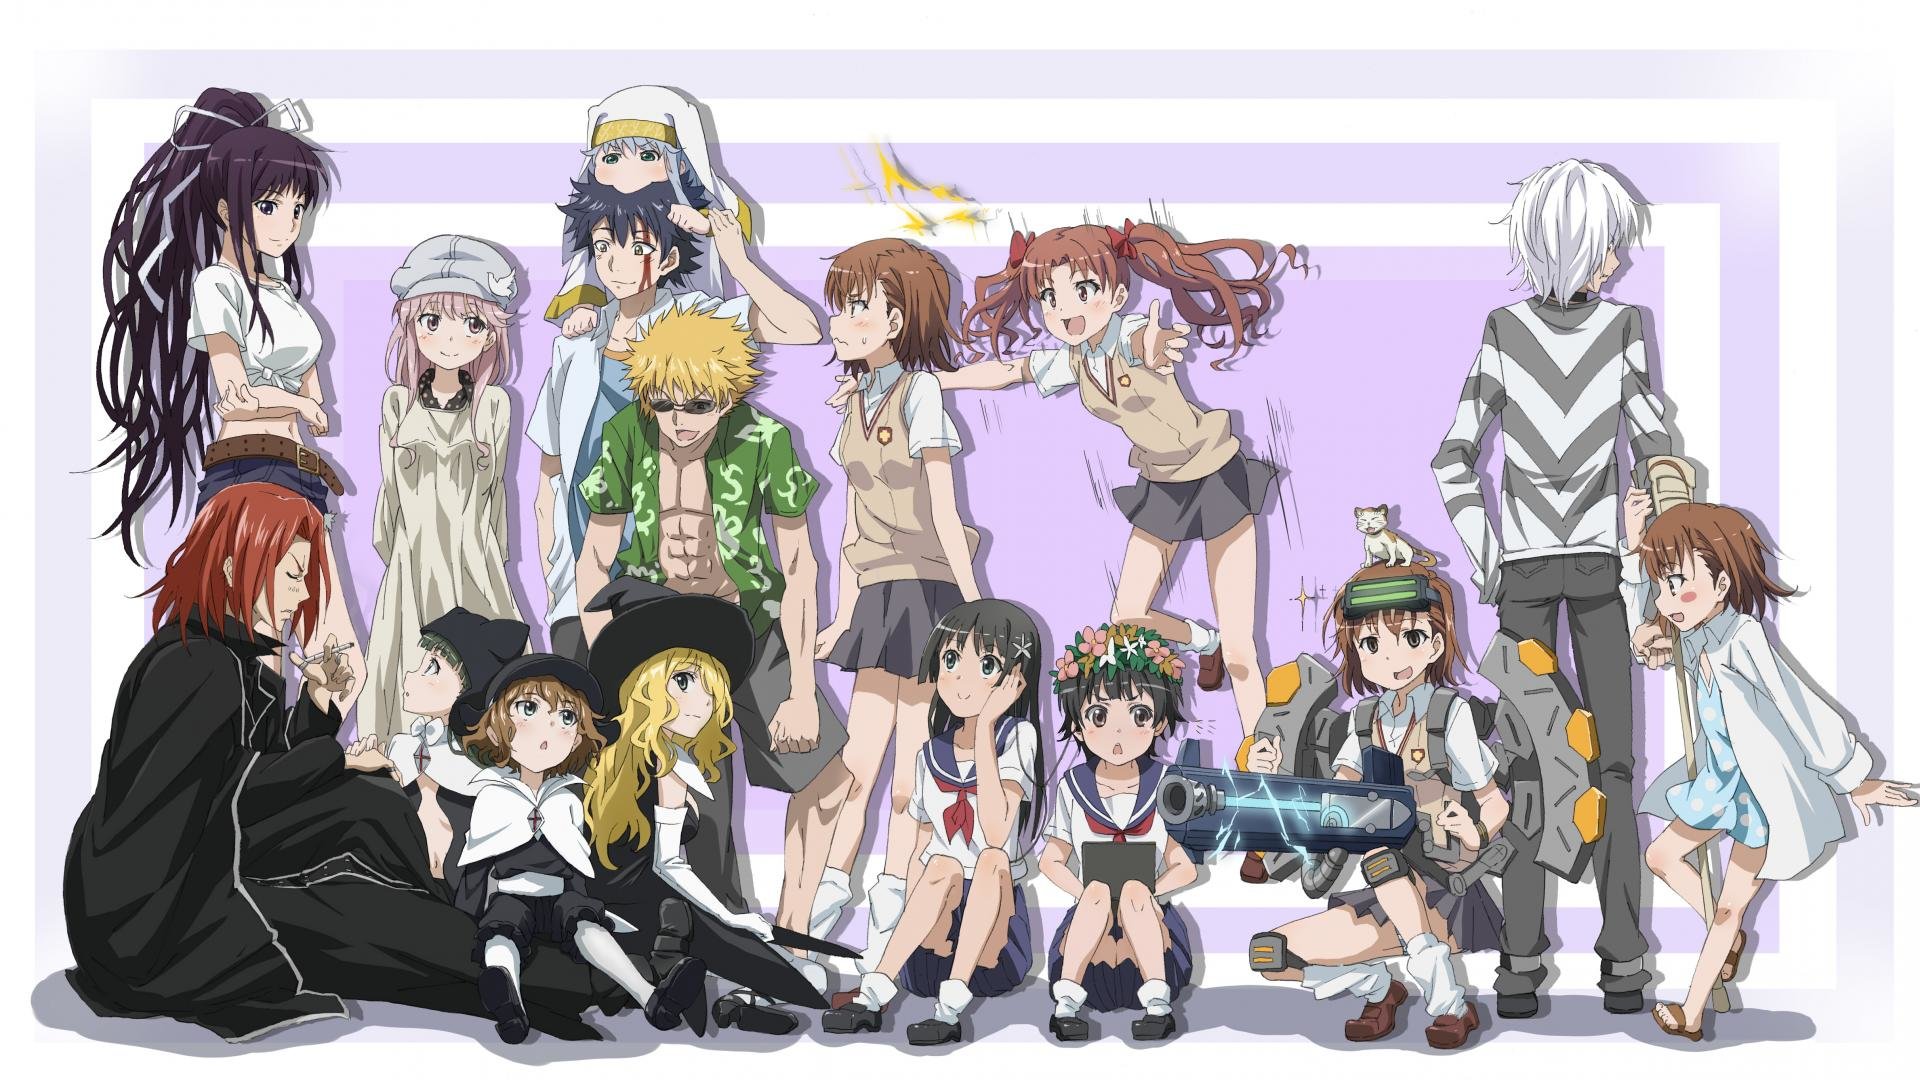 Best To Aru Majutsu No Index (A Certain Magical Index) wallpaper ID:195816 for High Resolution hd 1920x1080 computer